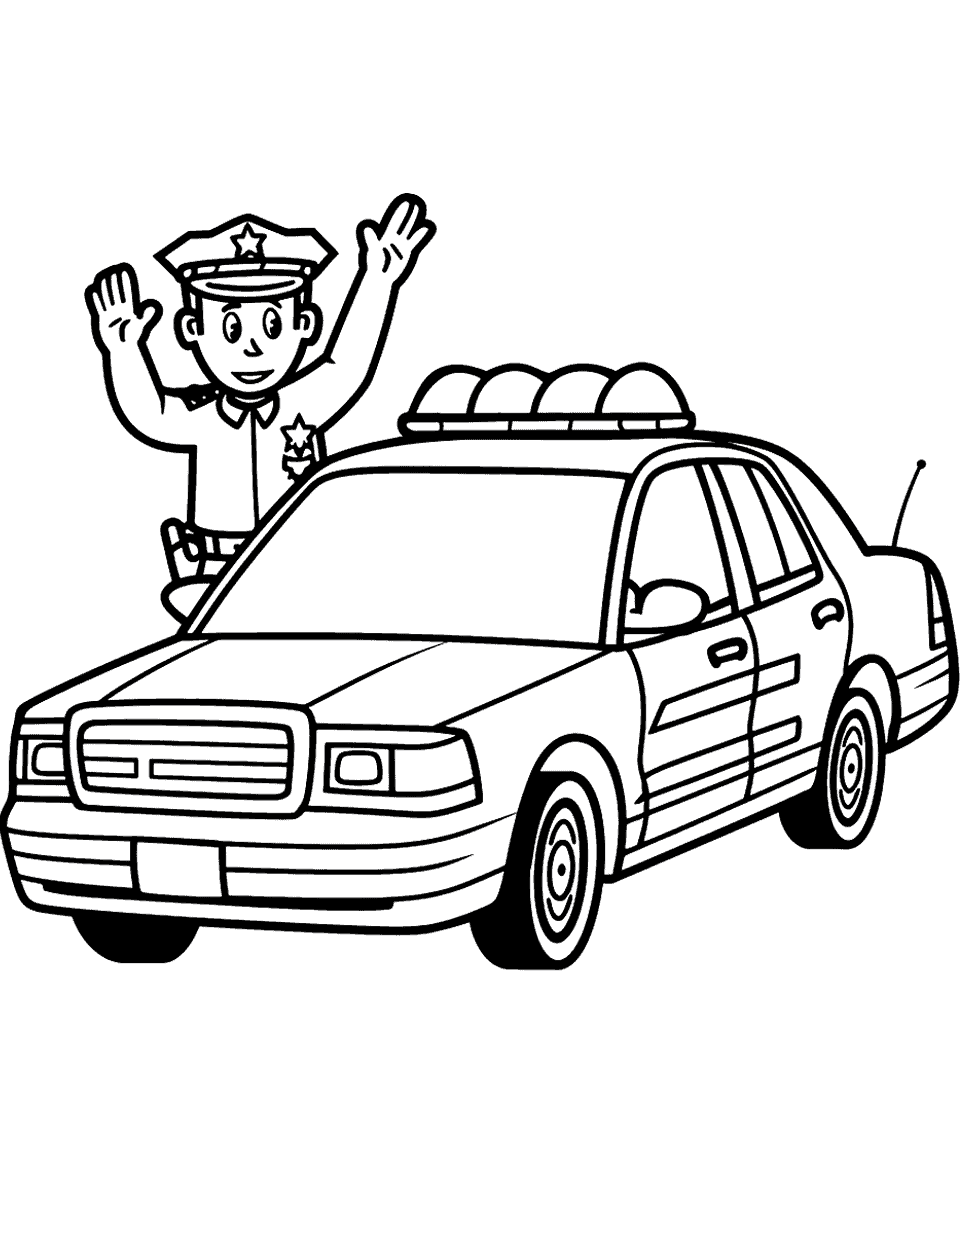 Police Officer Waving Car Coloring Page - A friendly police officer standing next to his car, waving.